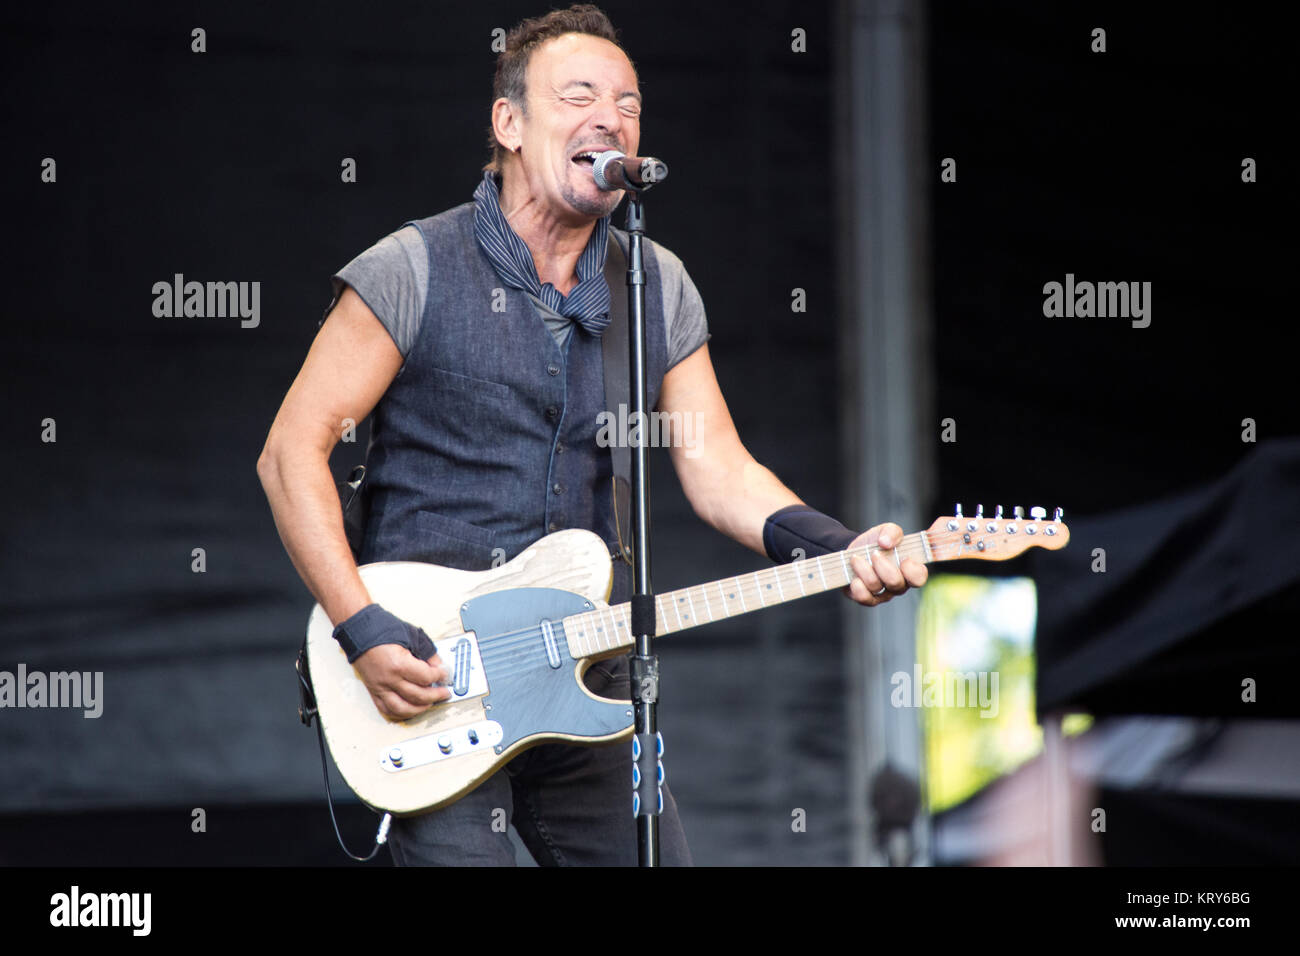 Høre fra sukker forbinde The American singer, songwriter and musician Bruce Springsteen performs a  live concert with his band The E Street Band at Frognerparken in Oslo.  Bruce Springsteen is also known as The Boss and